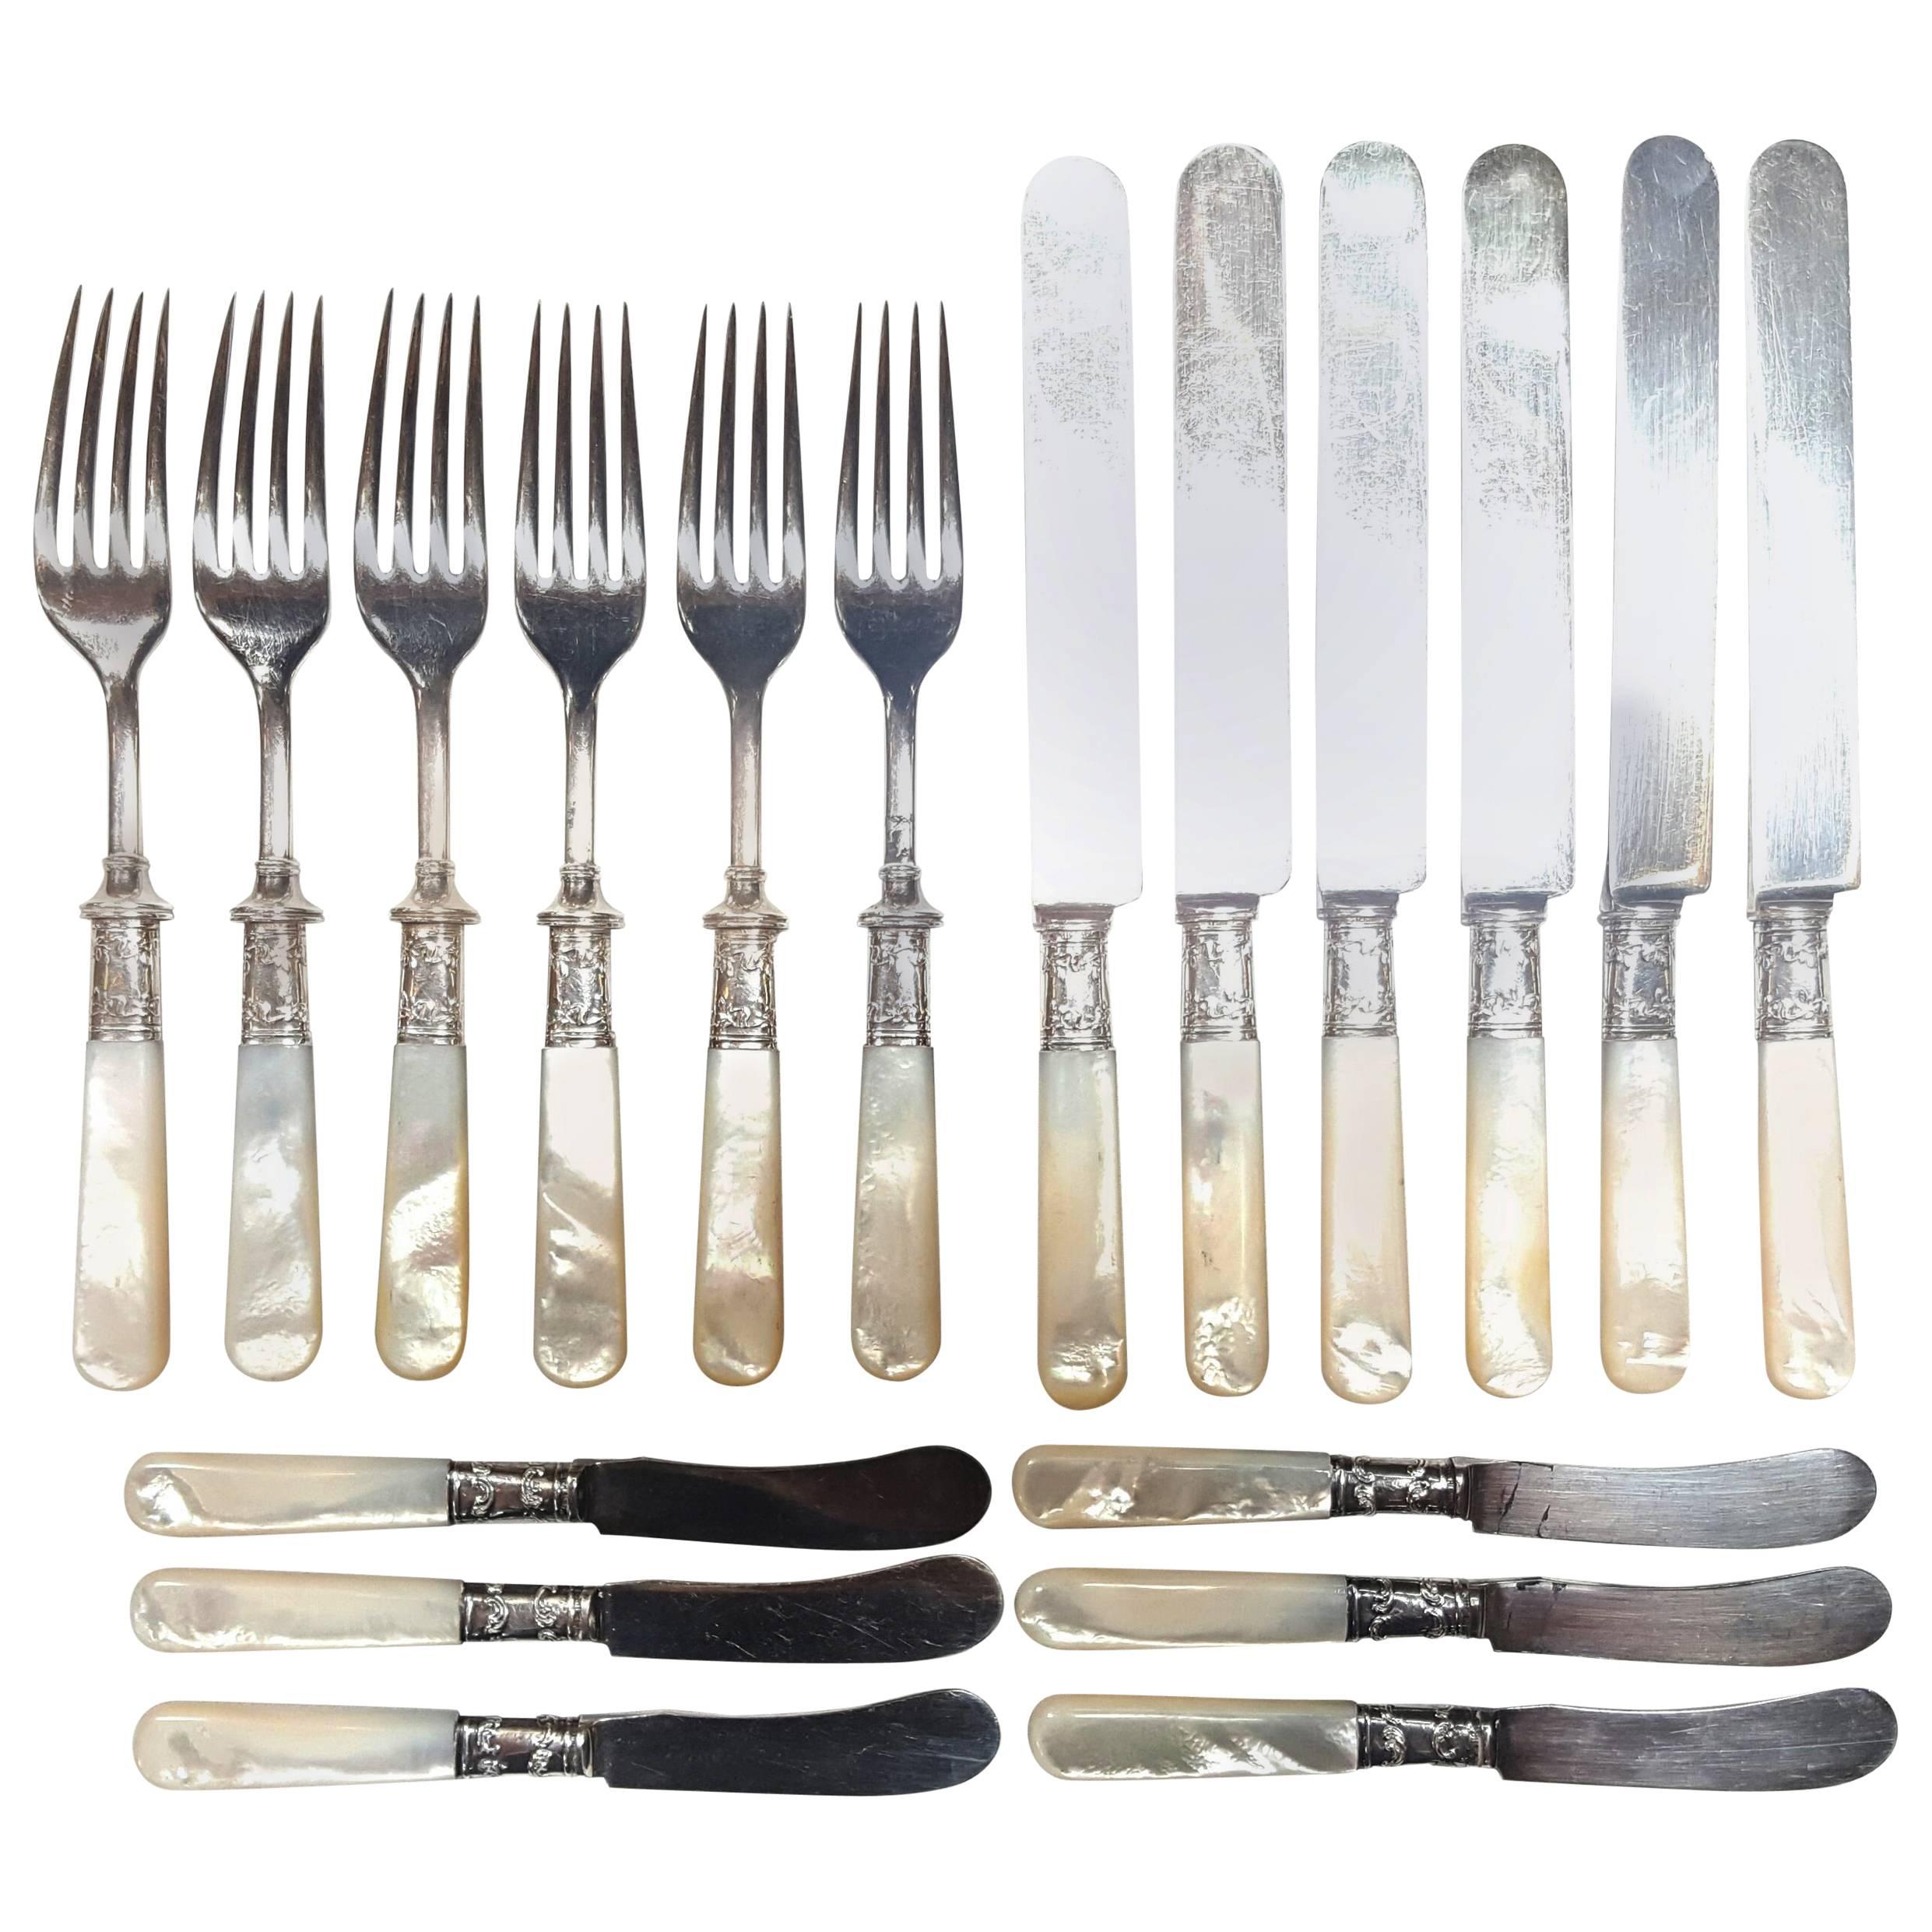 Antique Fish Flatware Set, Sterling Silver with Mother-of-pearl, Set of 18 For Sale